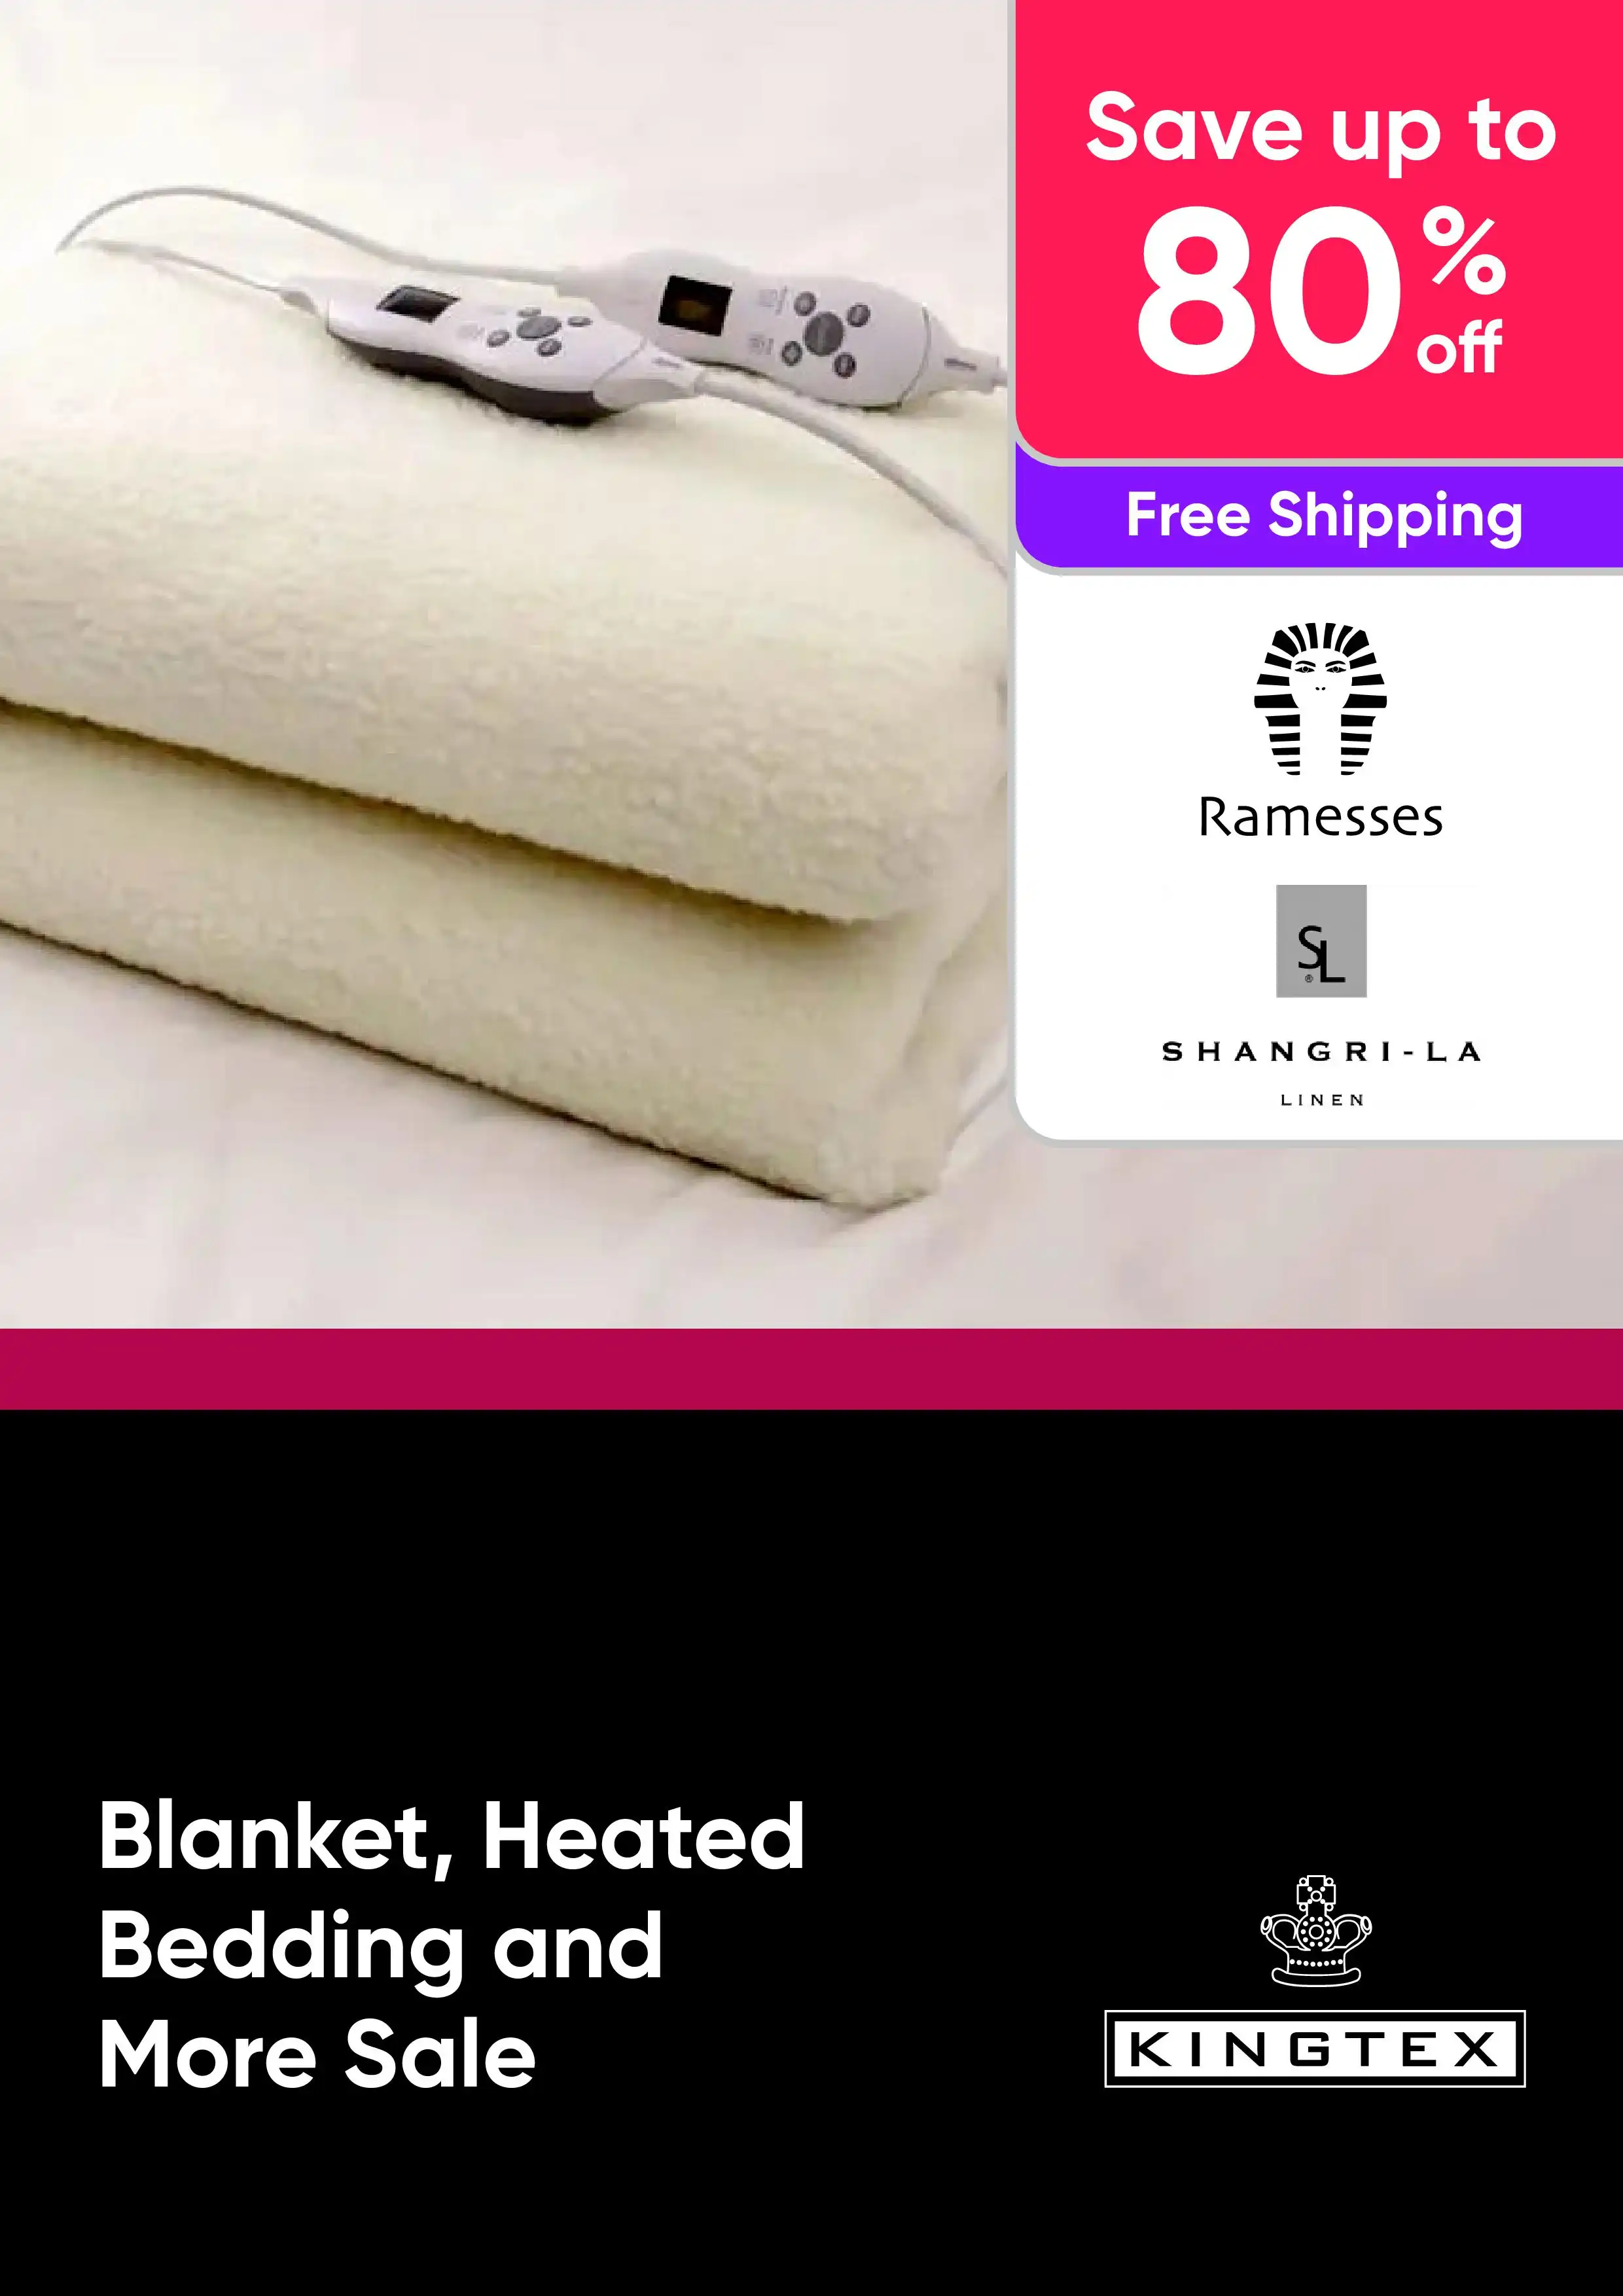 Blanket, Heated Bedding and More Sale - Up to 80% Off